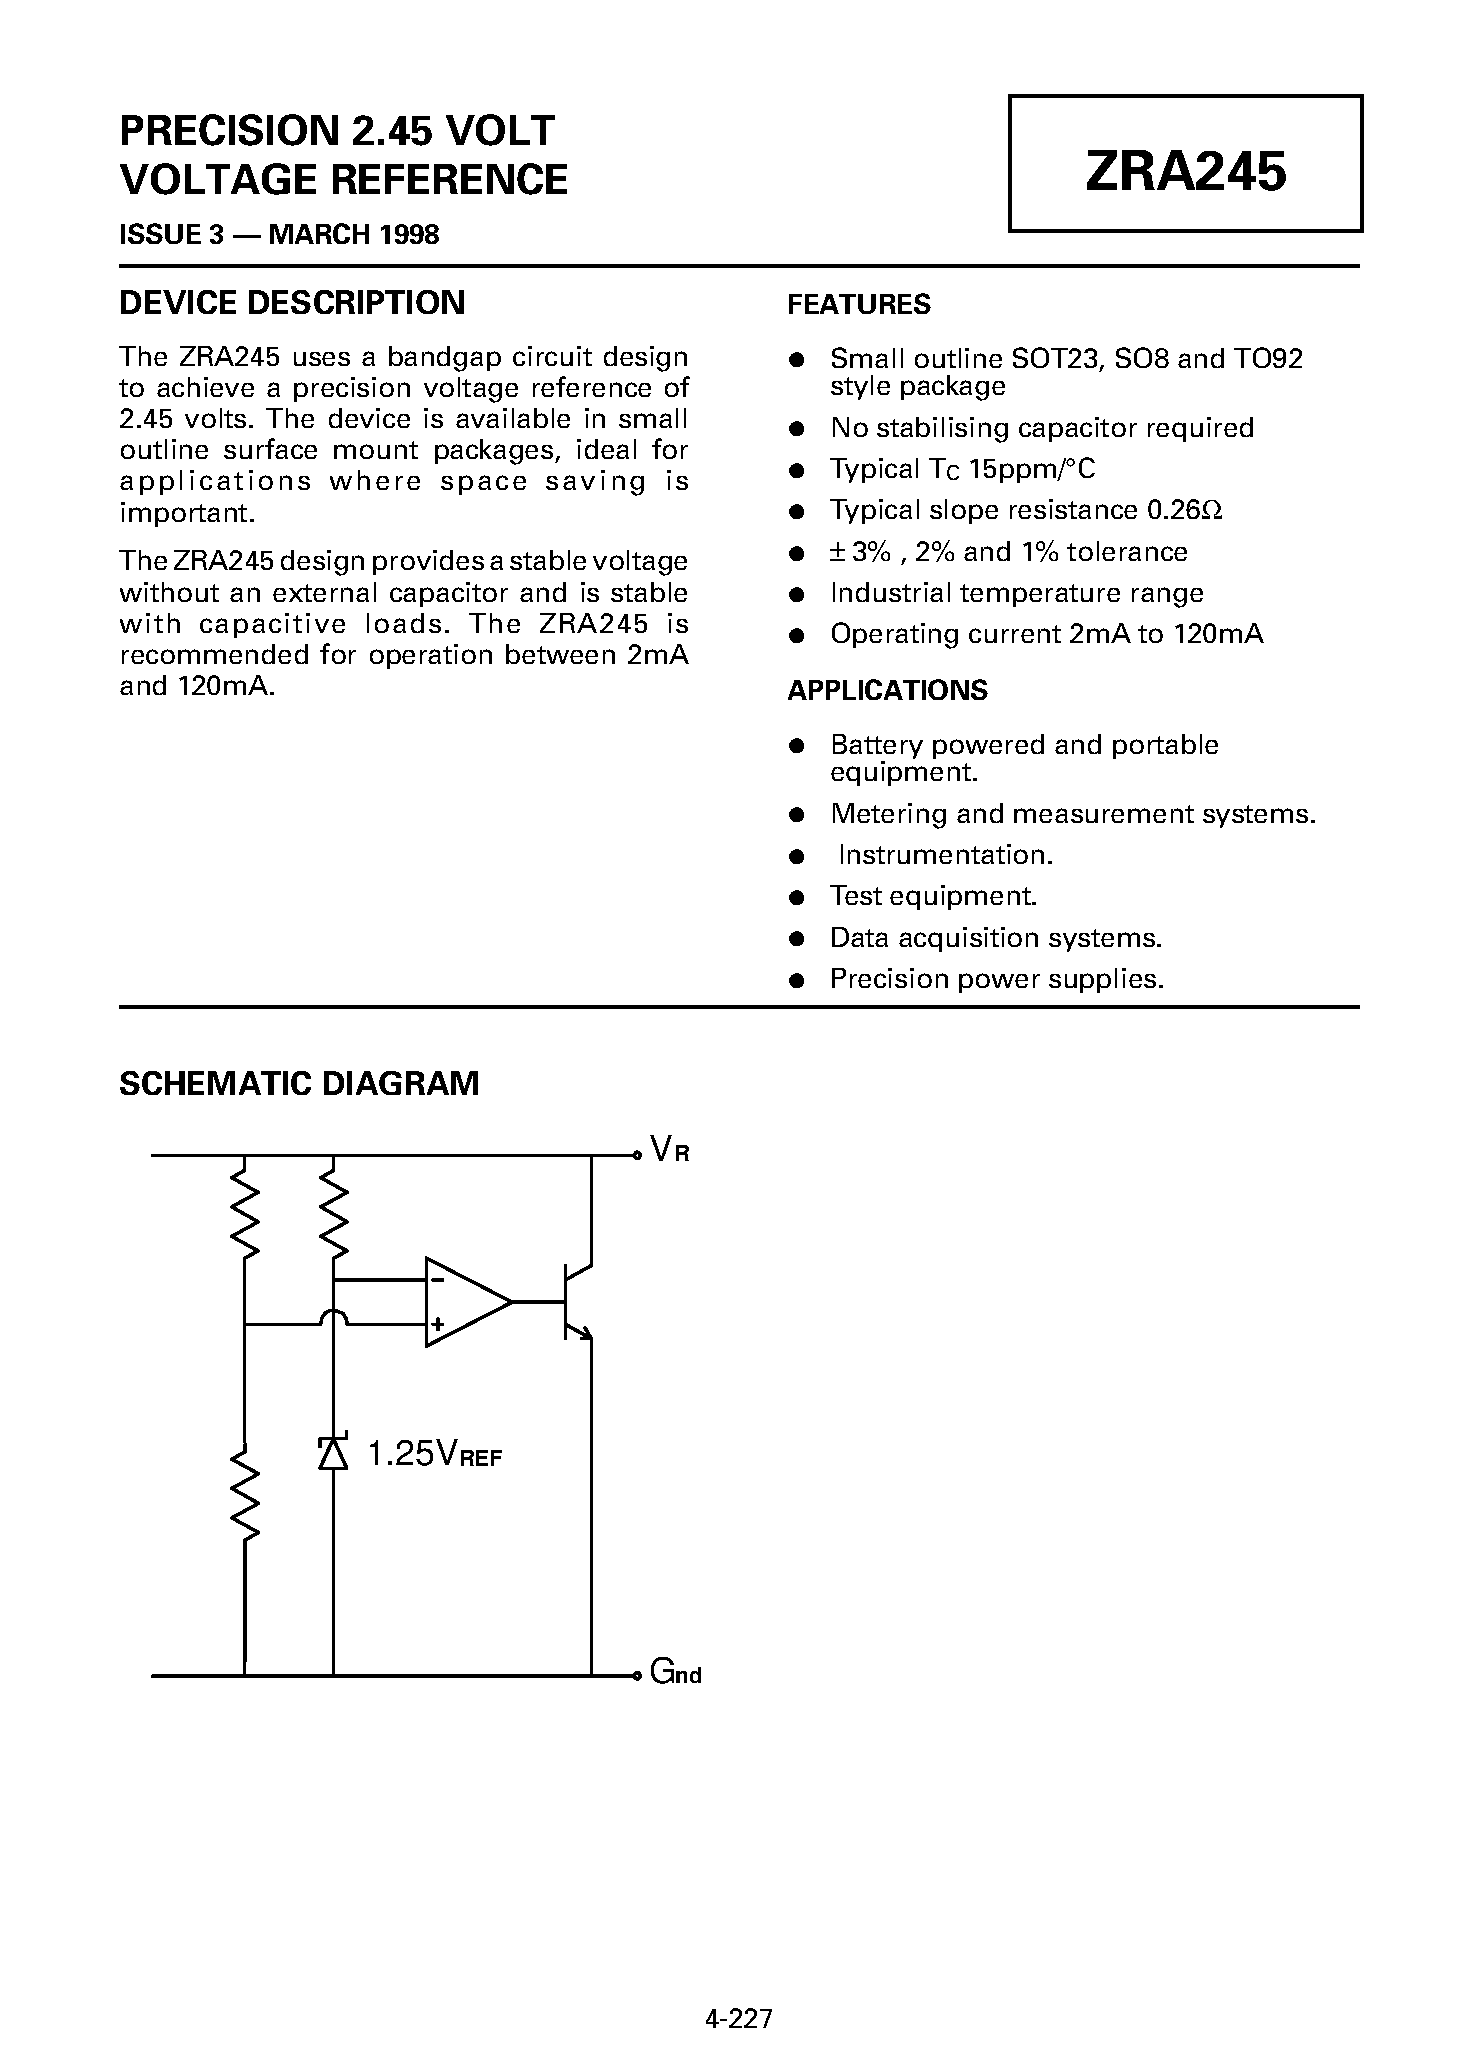 Datasheet ZRA245R01 - PRECISION 2.45 VOLT VOLTAGE REFERENCE page 1